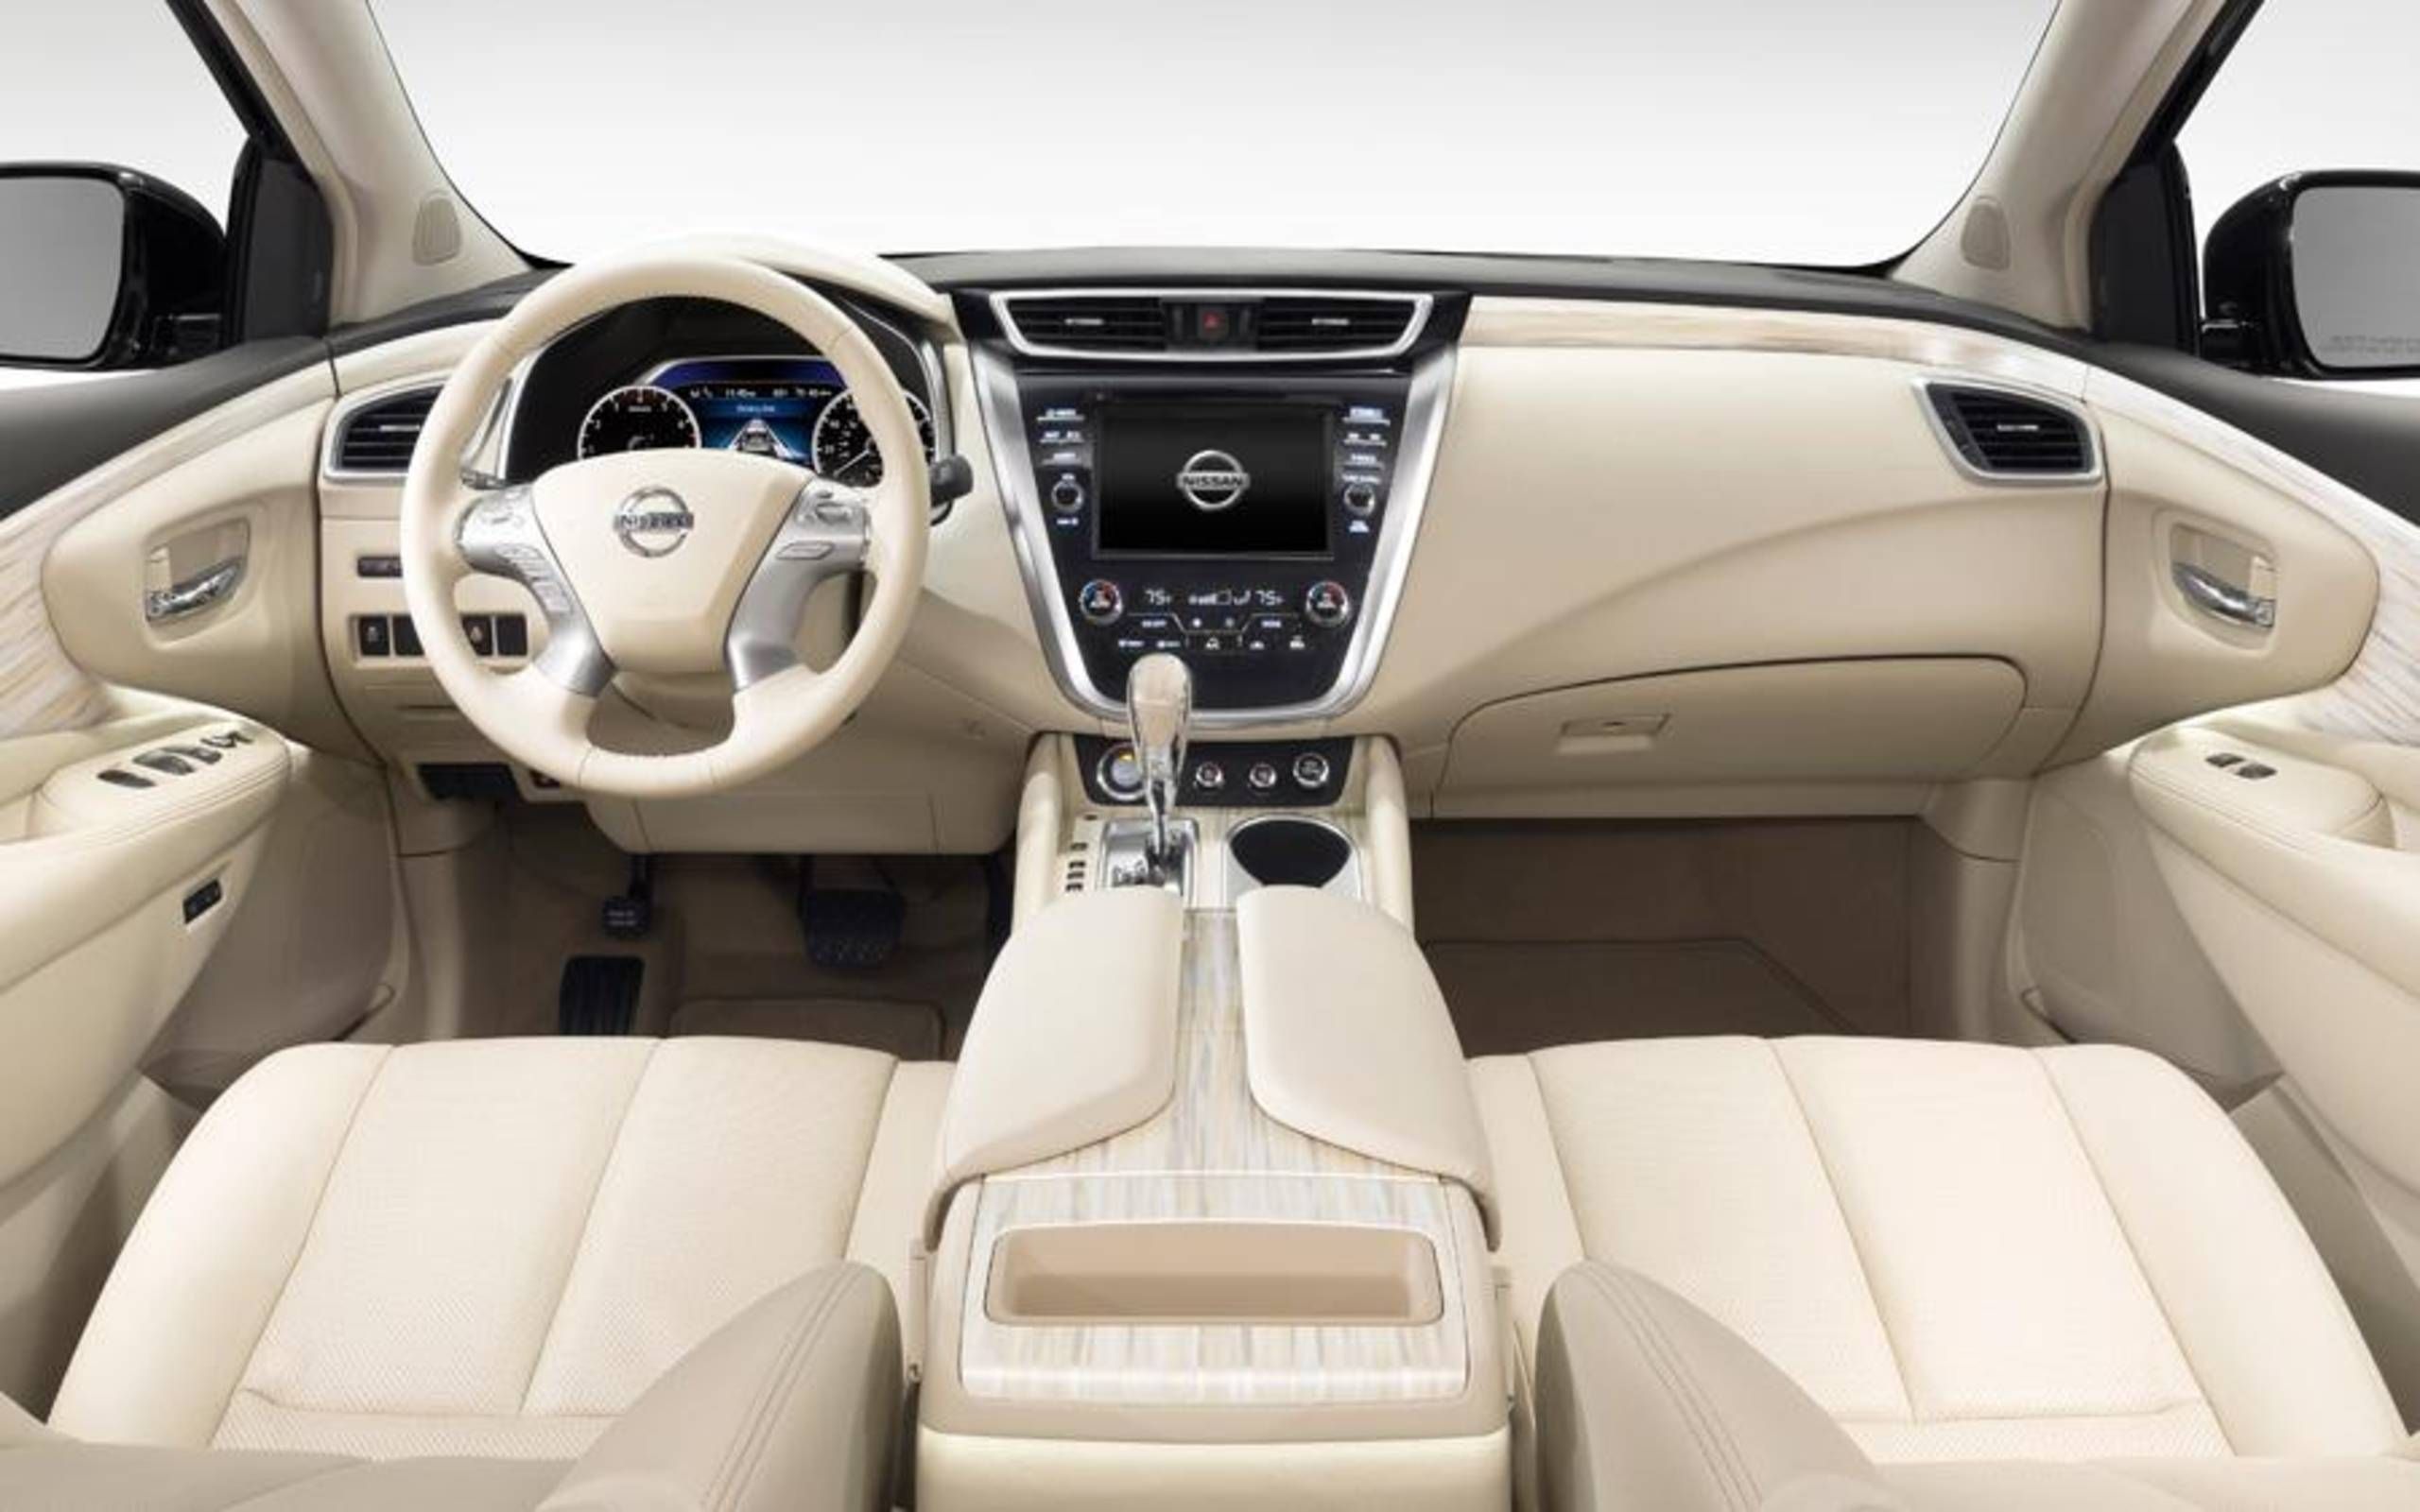 2015 Nissan Murano touches down at New York auto show Wednesday